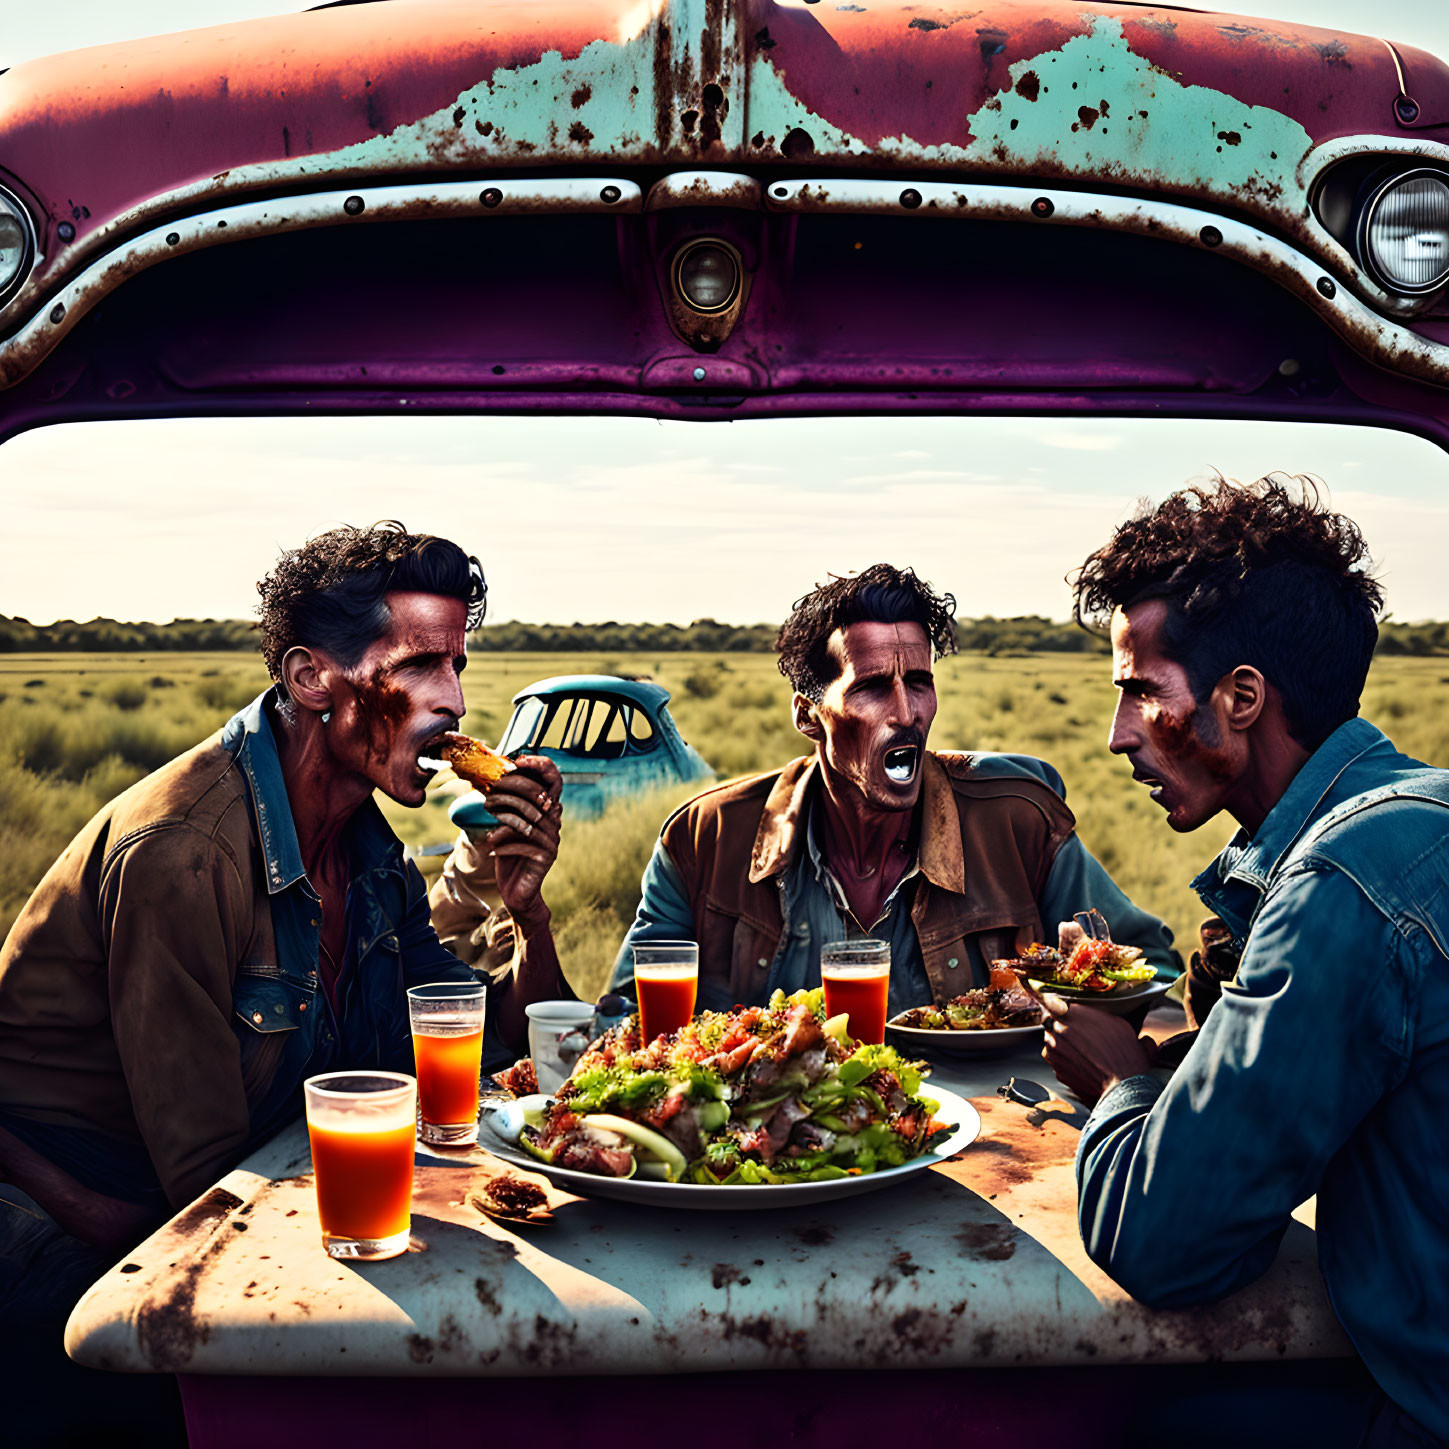 Men eating burgers and drinking at old car hood in field